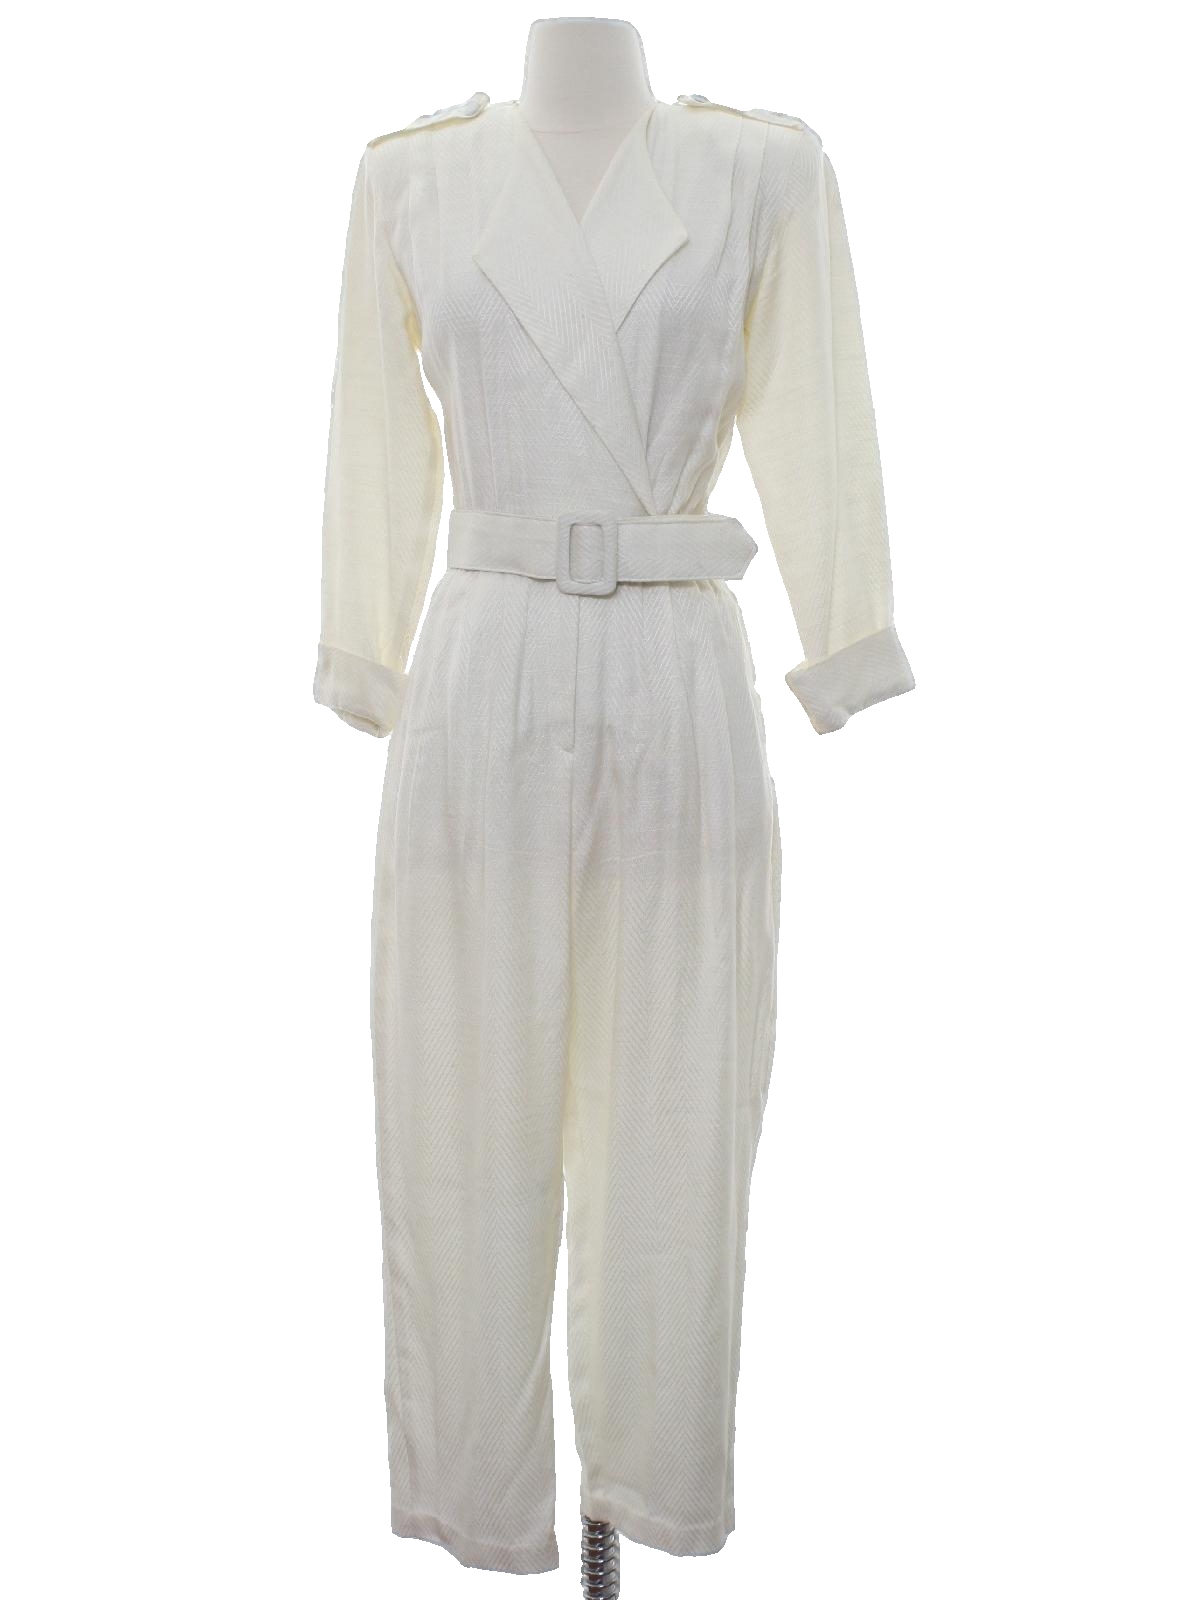 1980s Vintage Suit: 80s -rabbit- Womens ivory, blended rayon, cuffed ...